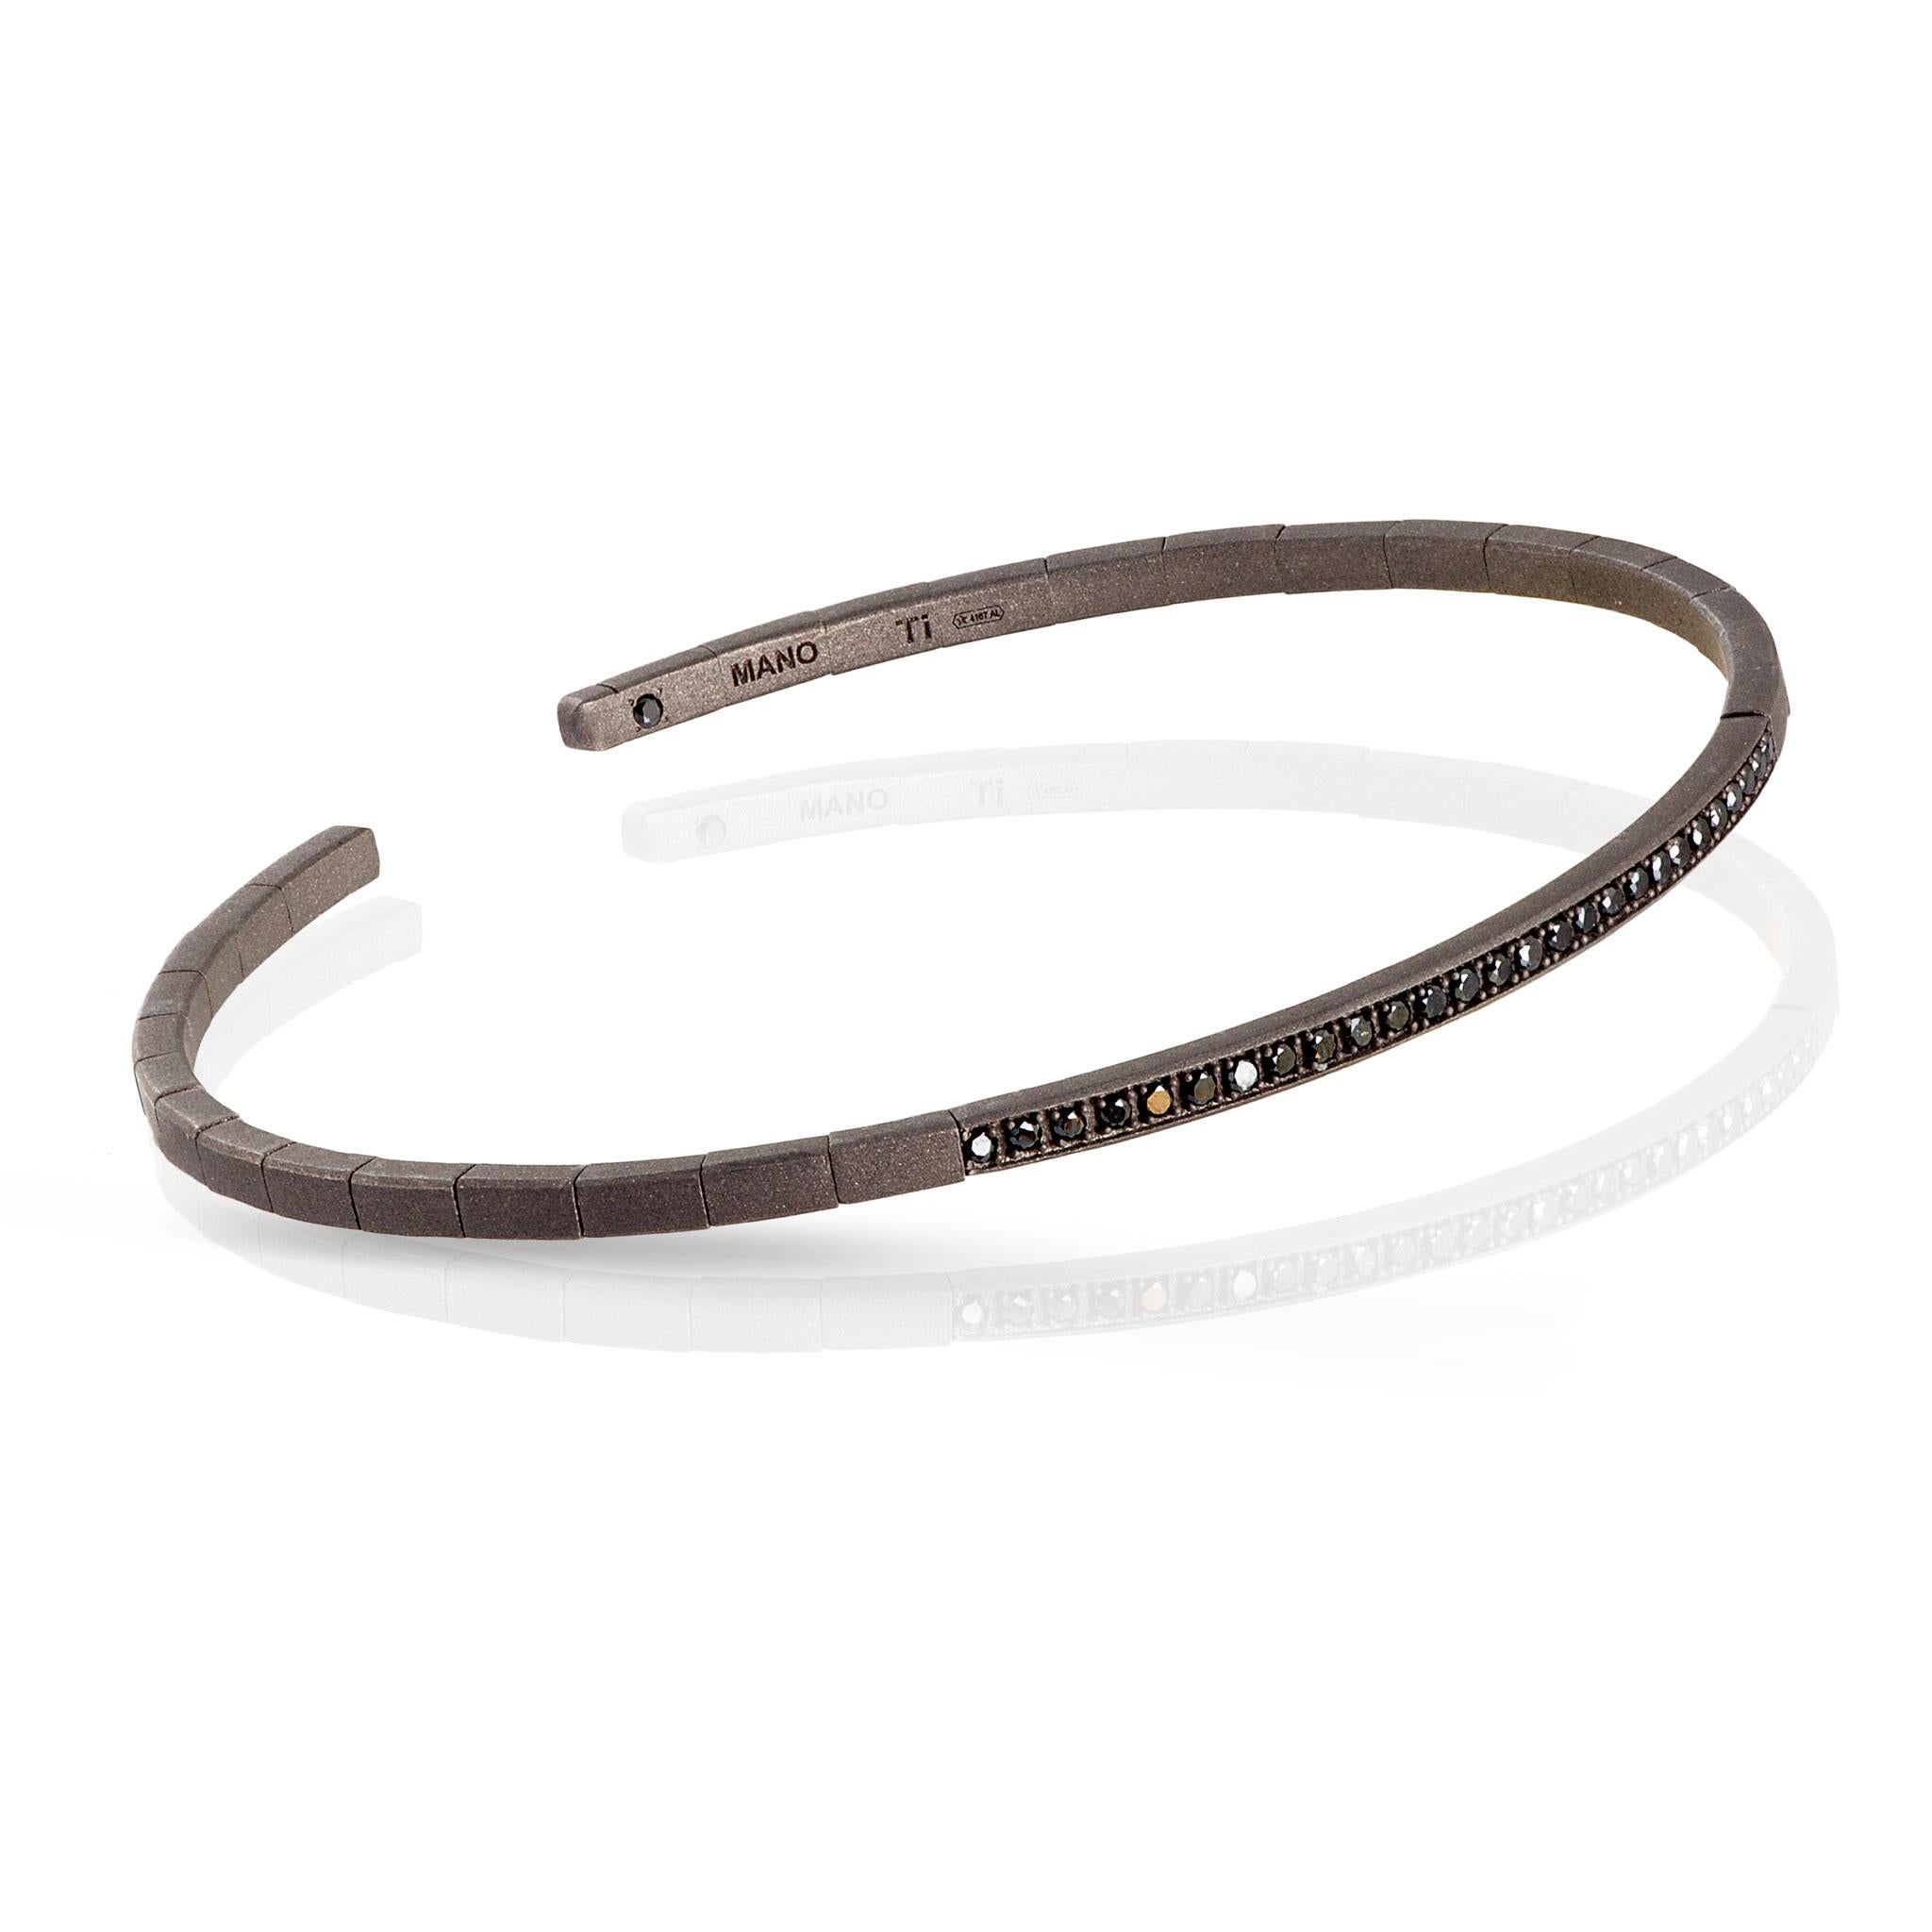 Men's titanium bracelet with black diamonds. A bracelet with an elastic structure featuring a long series of 27 black diamonds with a total carat of 27 points running through part of the bracelet. On the inside, a 1-point black diamond has been set